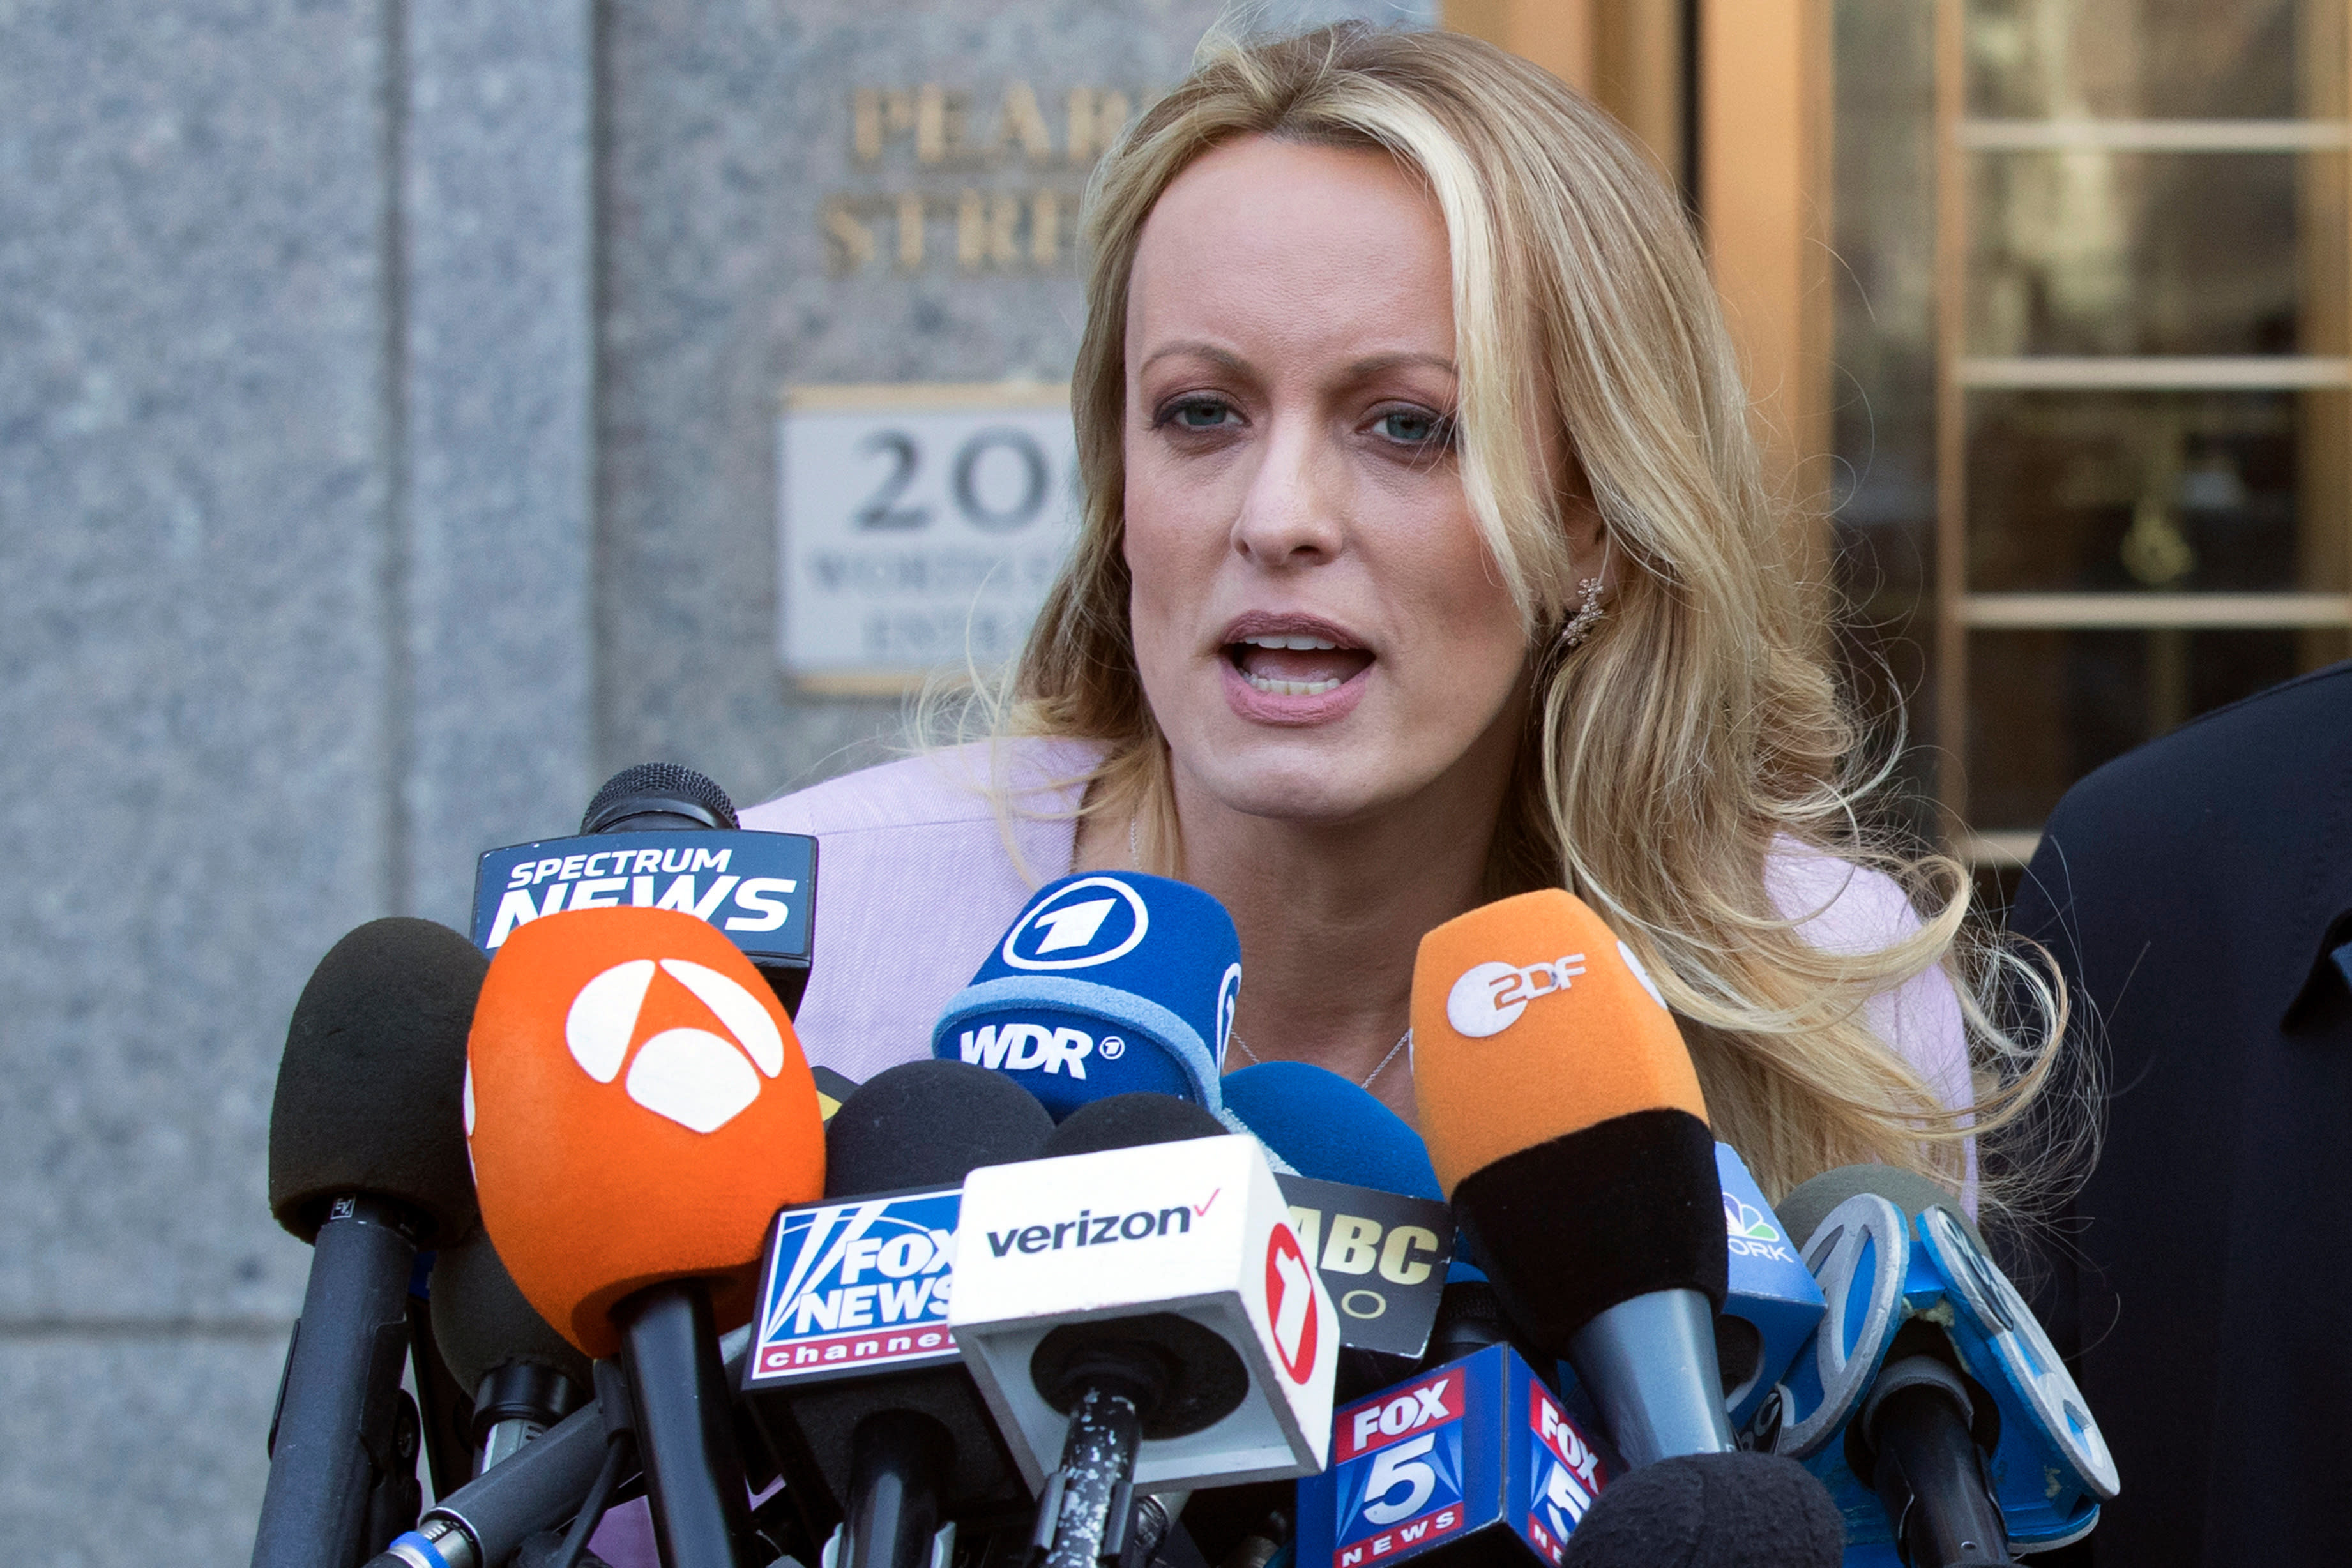 Police in probe that led to Stormy Daniels arrest charged